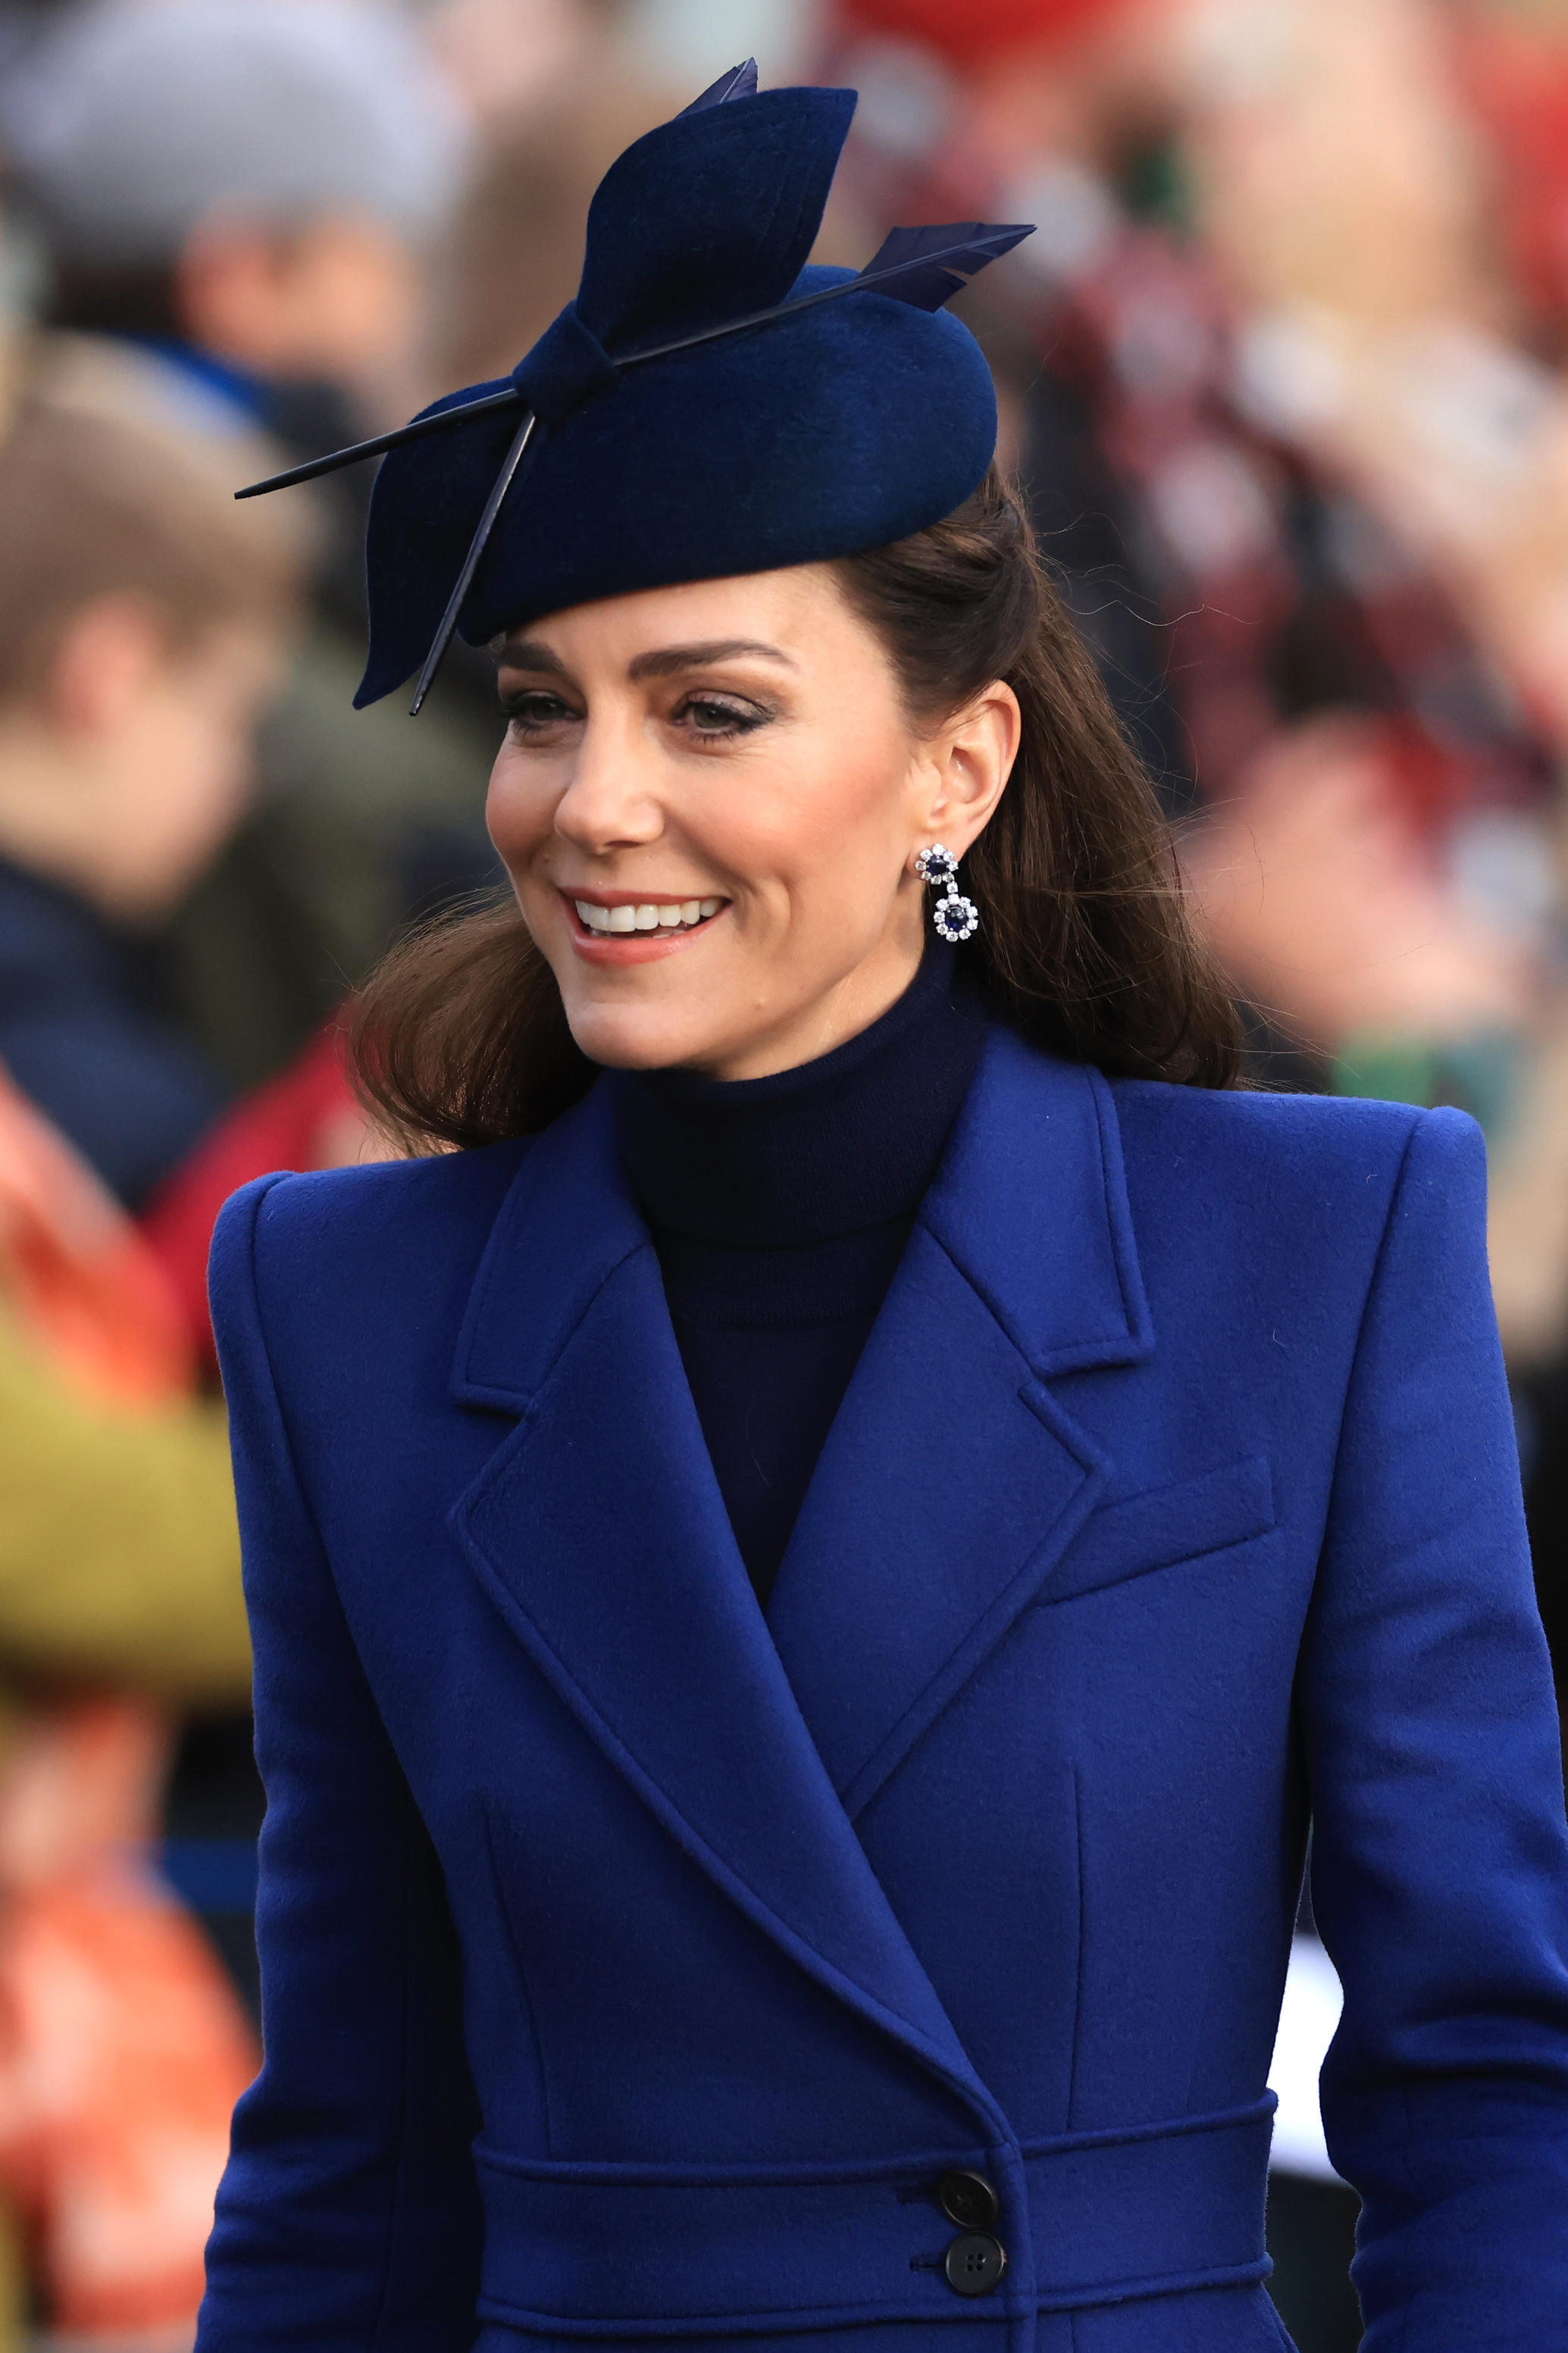 Kate Middleton in a blue coat and matching hat, smiling at a public event